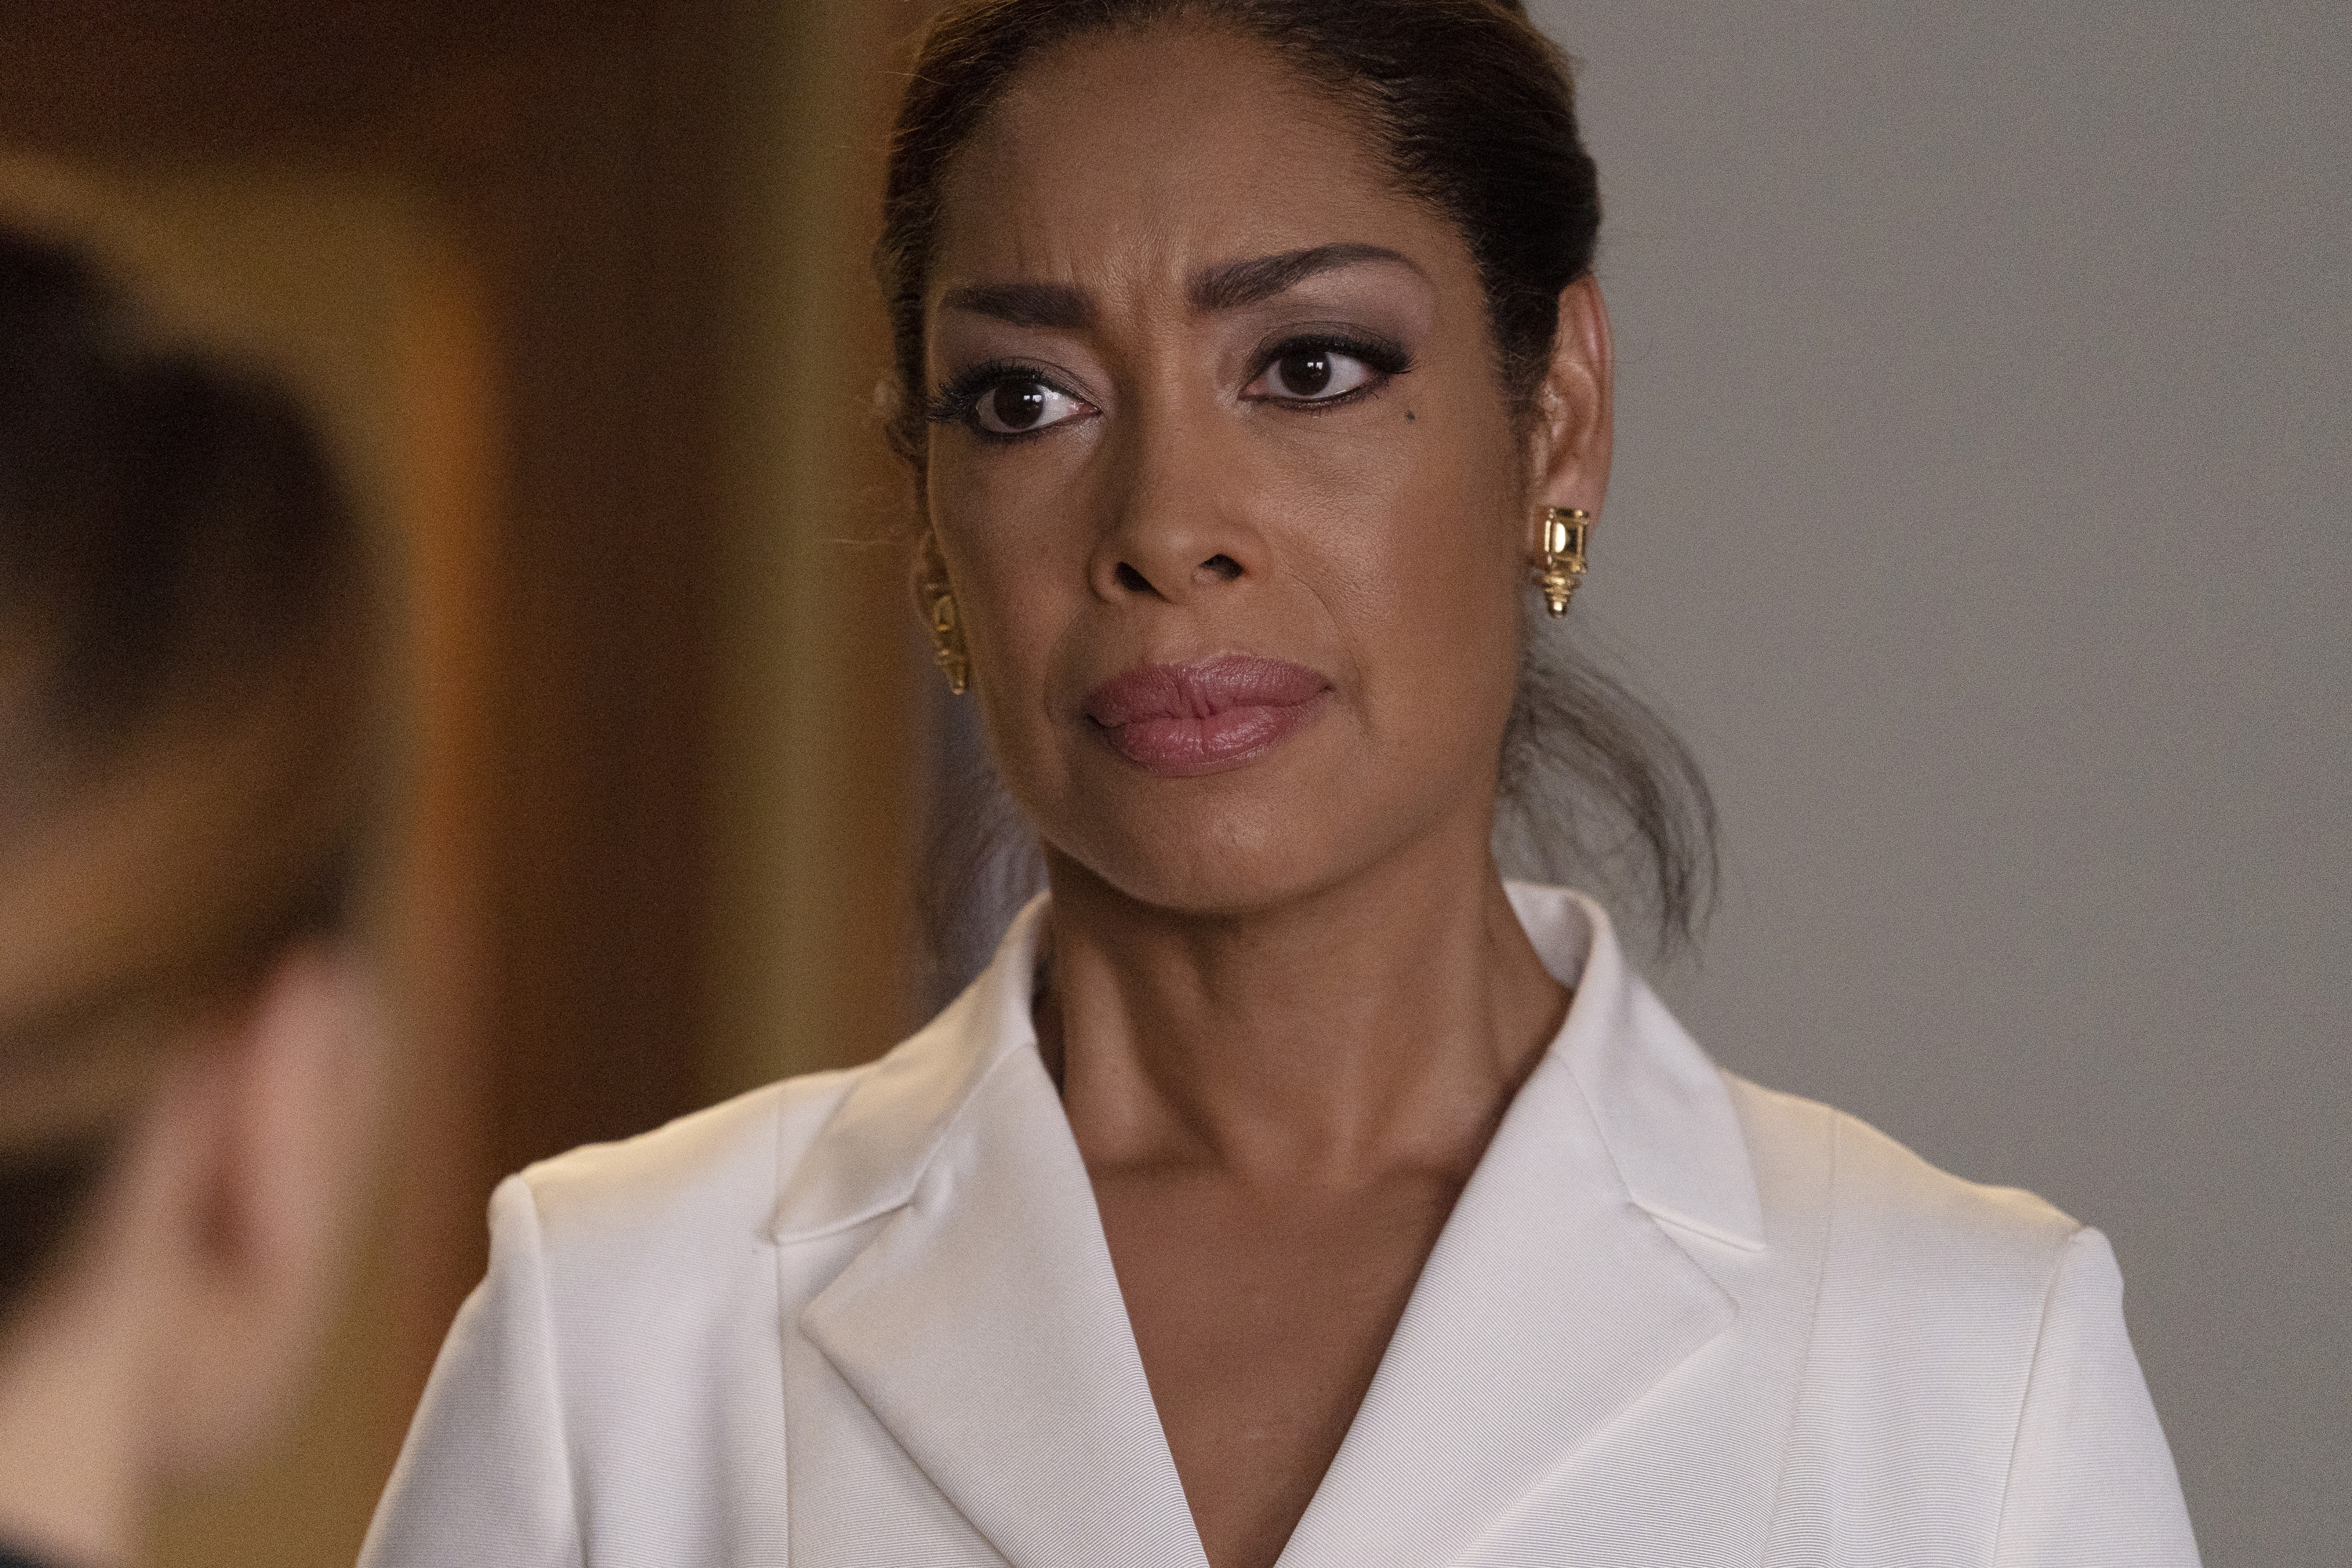 Gina Torres in a white blazer, looking concerned at someone out of frame